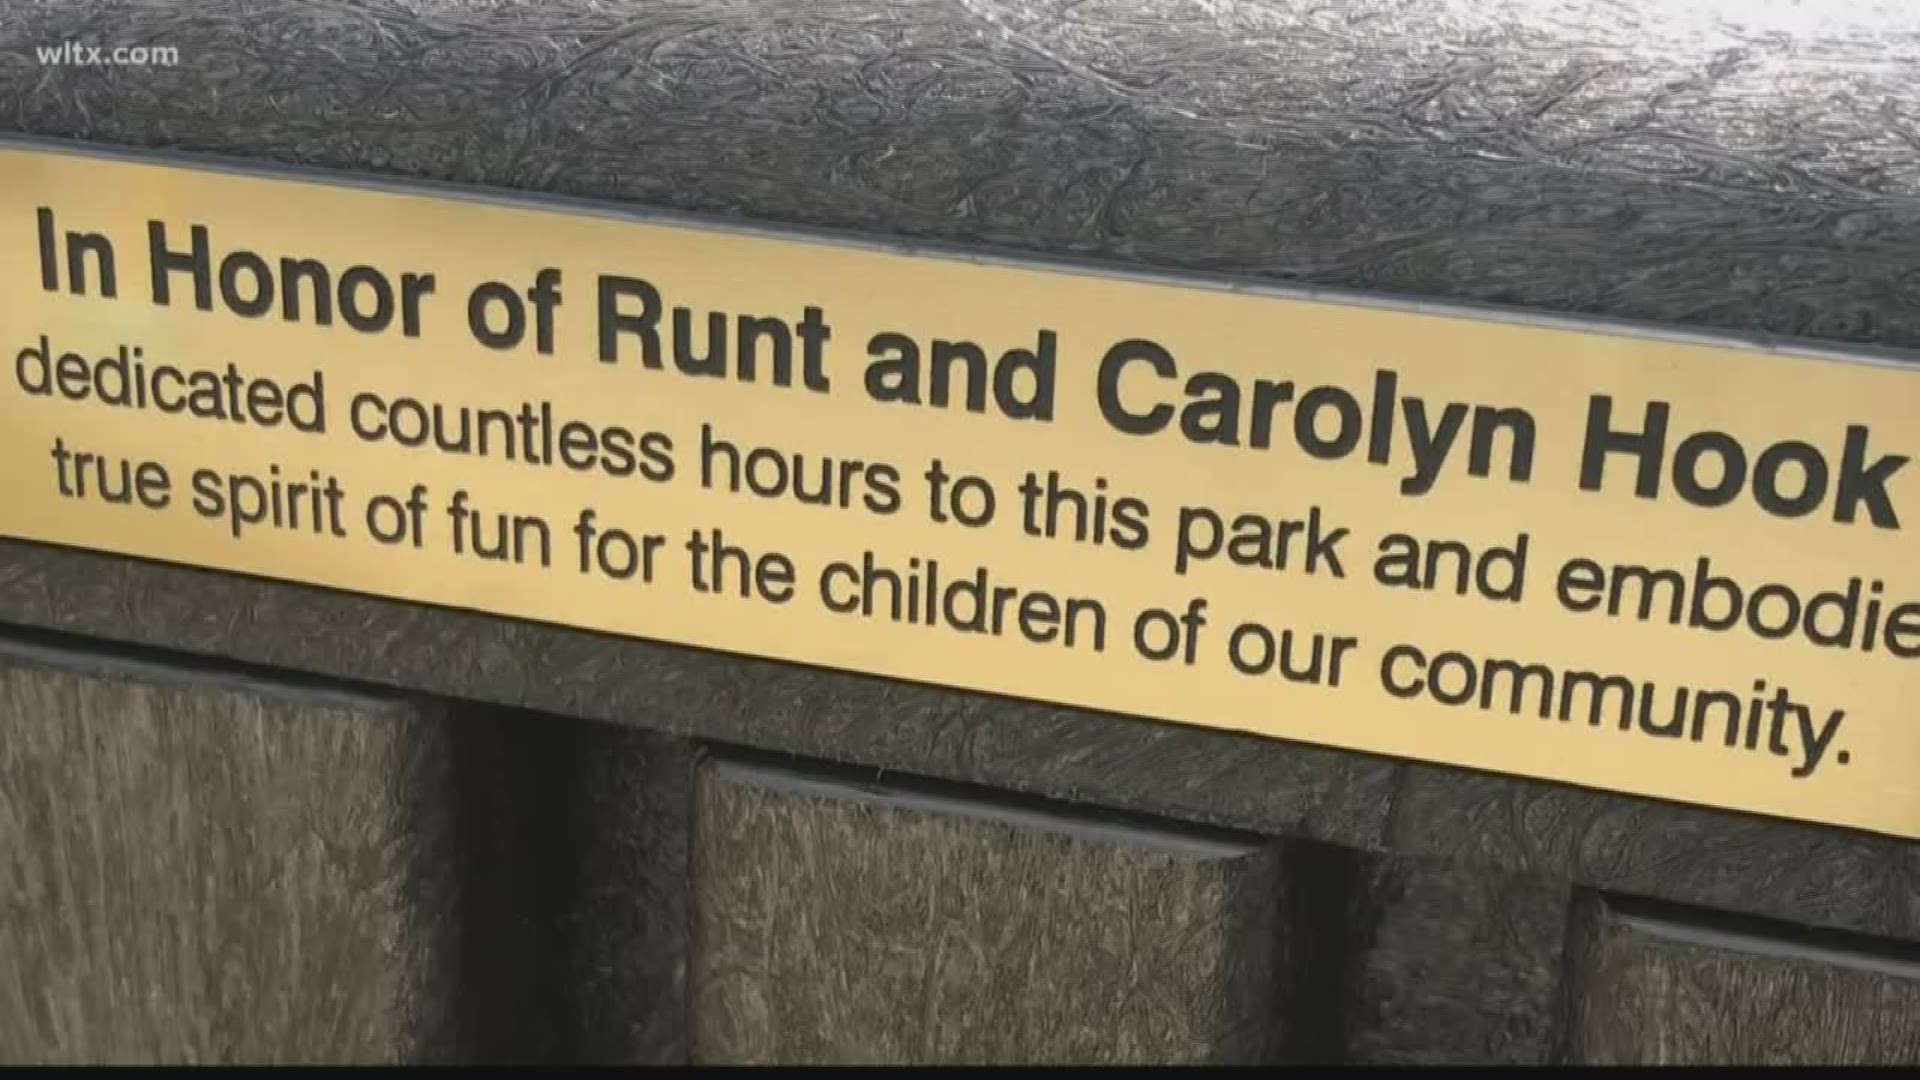 Tommy Hook Sr., better known as Runt, and his wife Carolyn were lifelong members of the Springdale. To honor the couple, the town decided to make a bench dedicated to the couples’ memory and what sacrifices they made for the community.